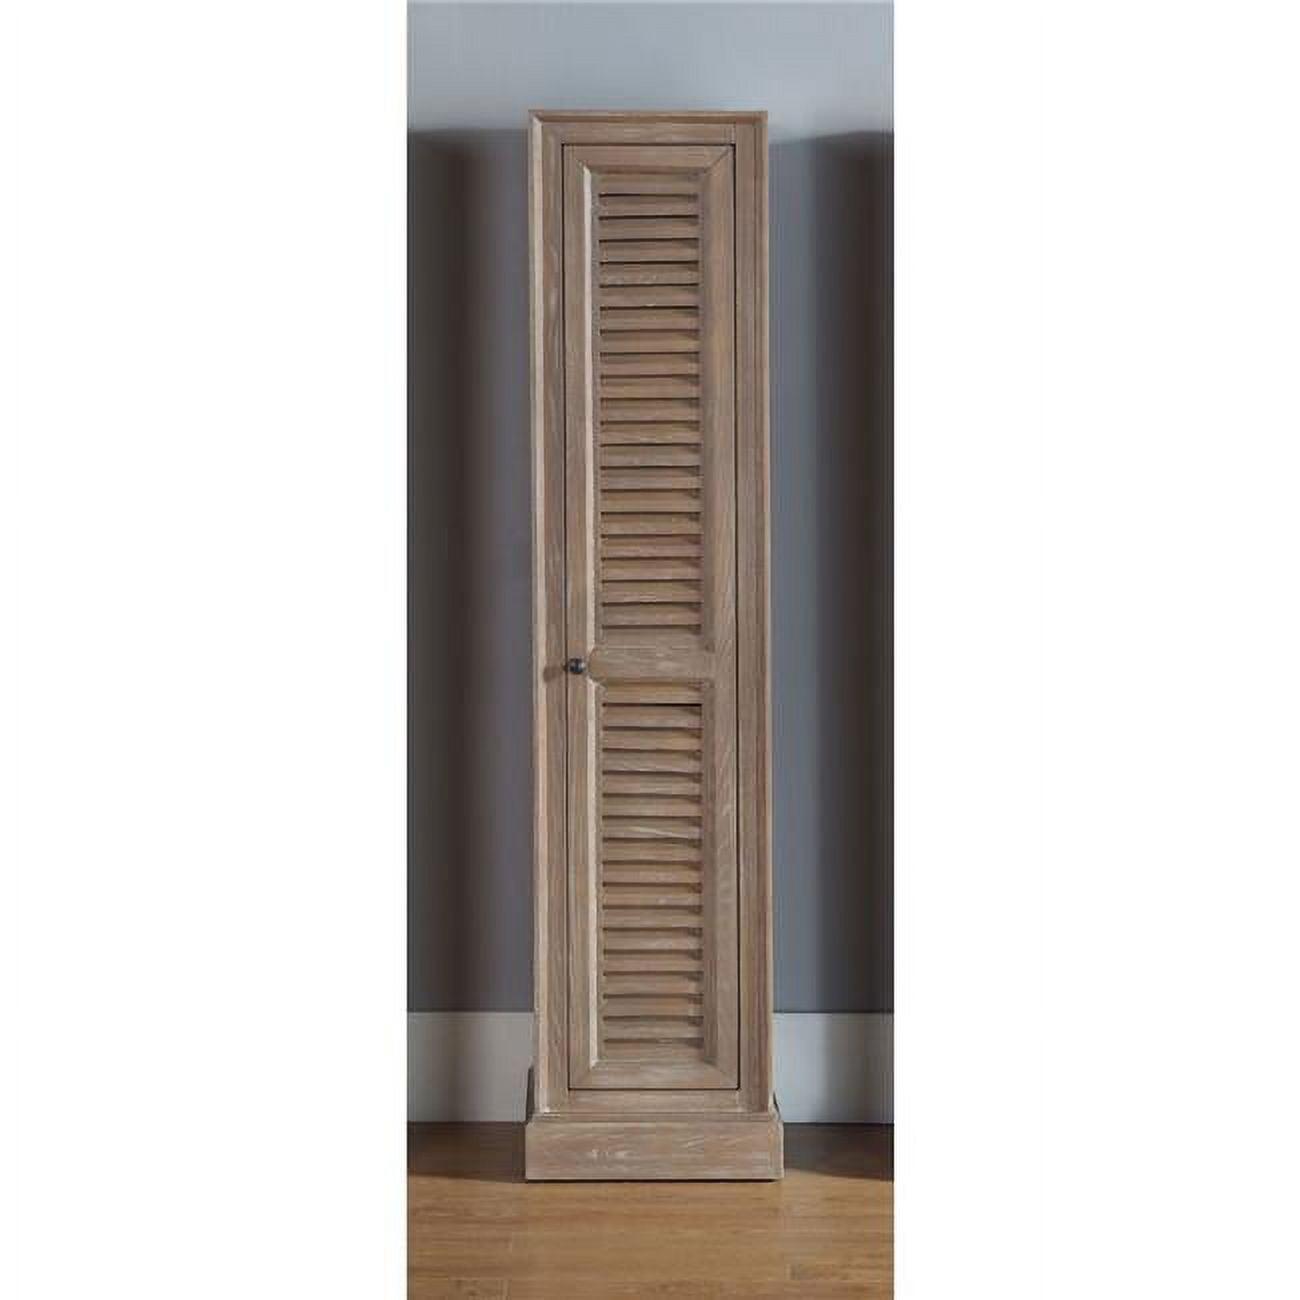 Driftwood Traditional Floor-Standing Linen Cabinet with Adjustable Shelves